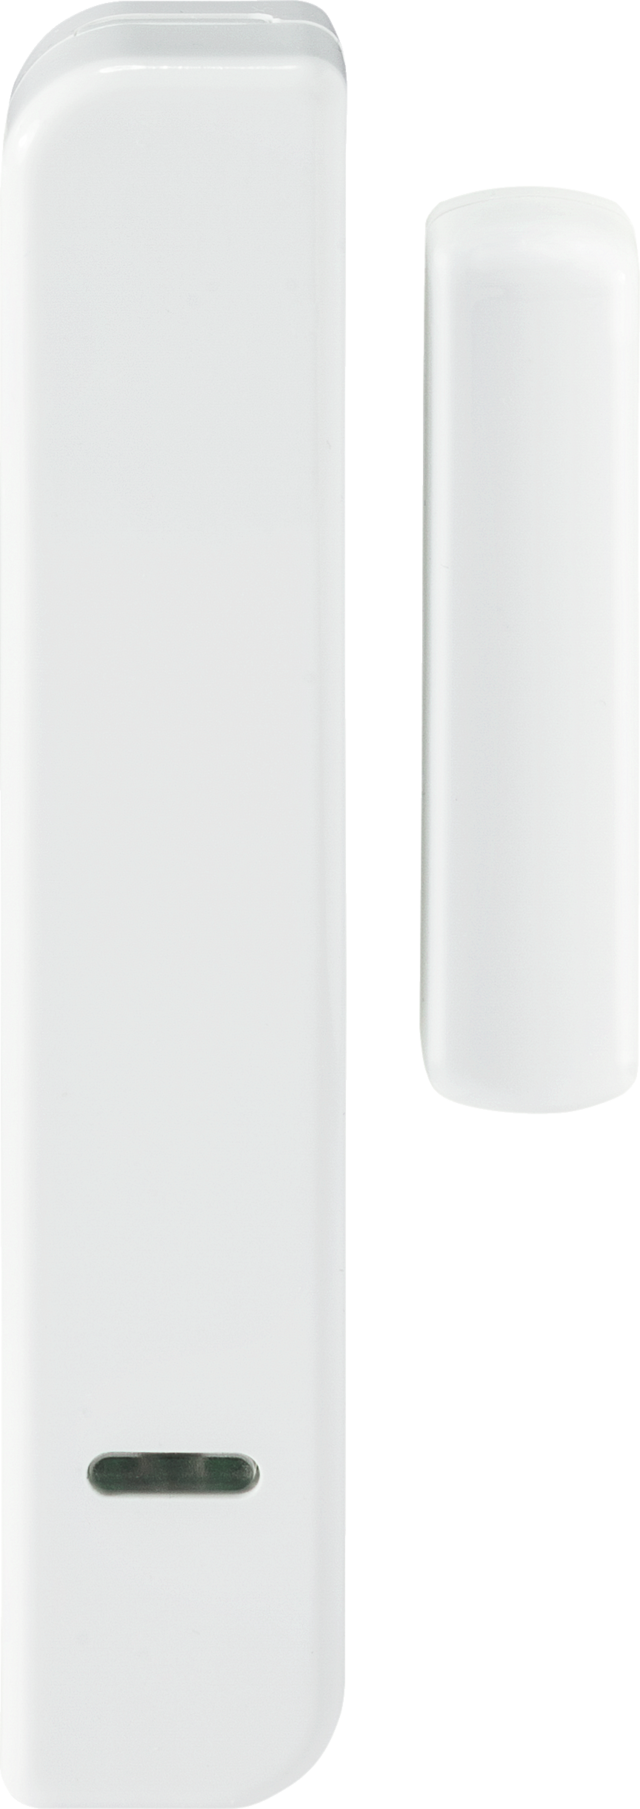 Secvest Small Wireless Magnetic Contact (white) front view